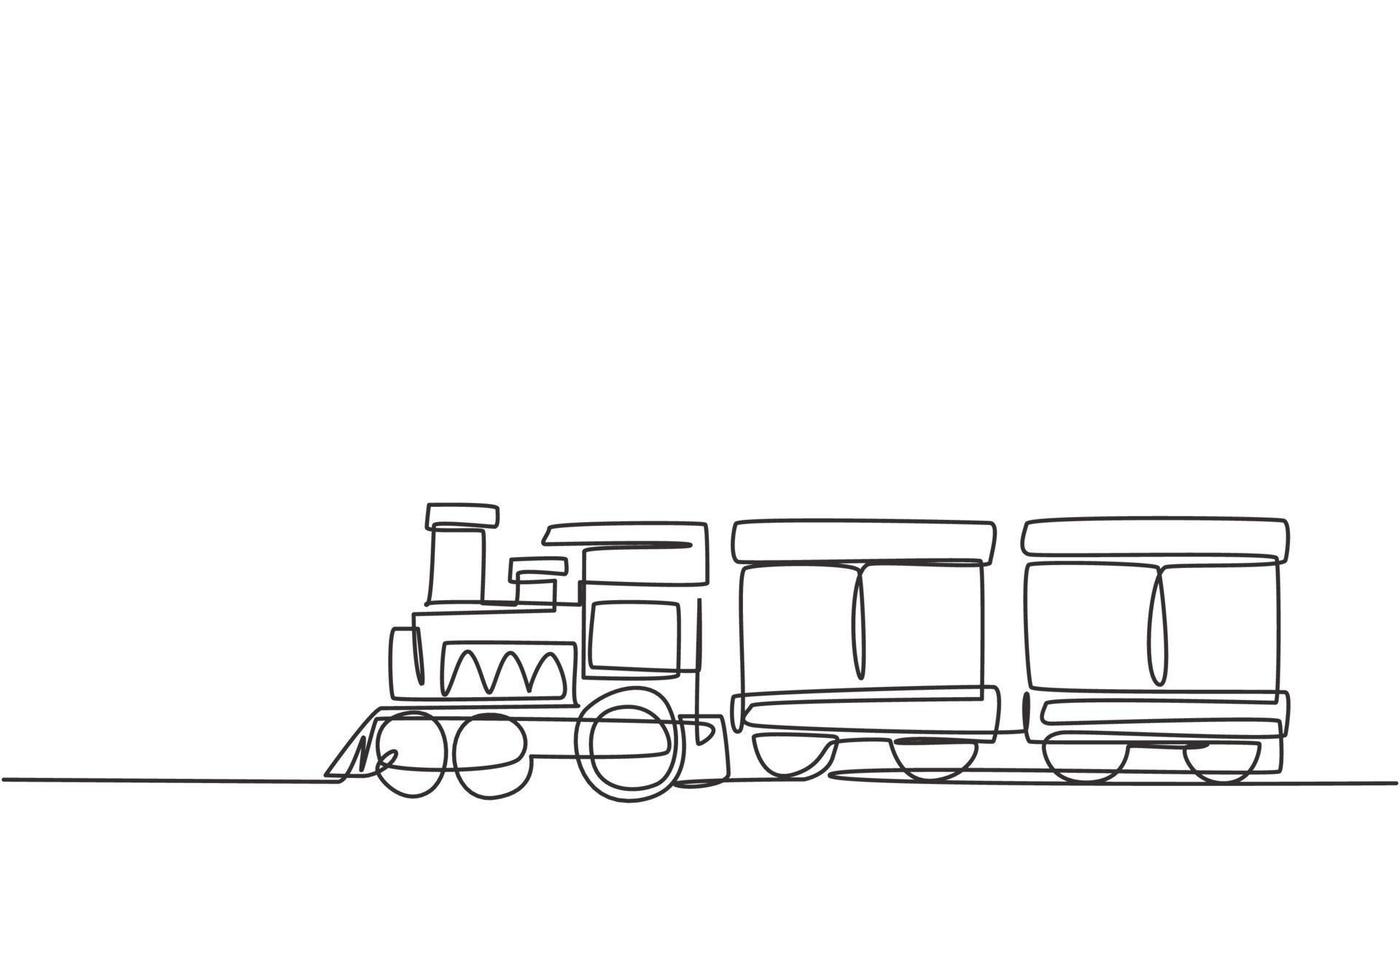 Single one line drawing of a train locomotive with two carriages in the  form of a